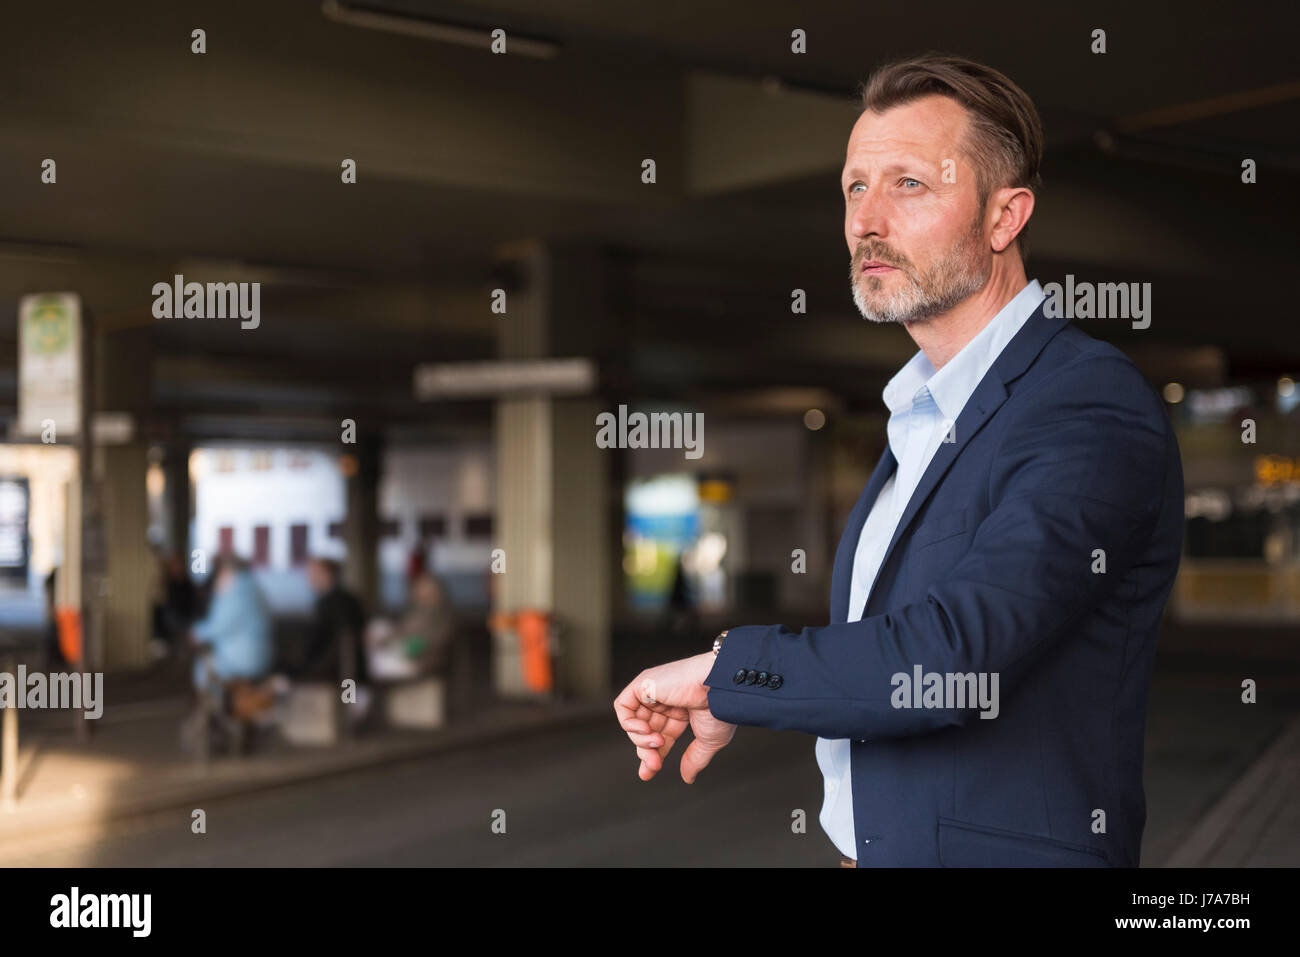 Businessman waiting at bus terminal checking the time Stock Photo